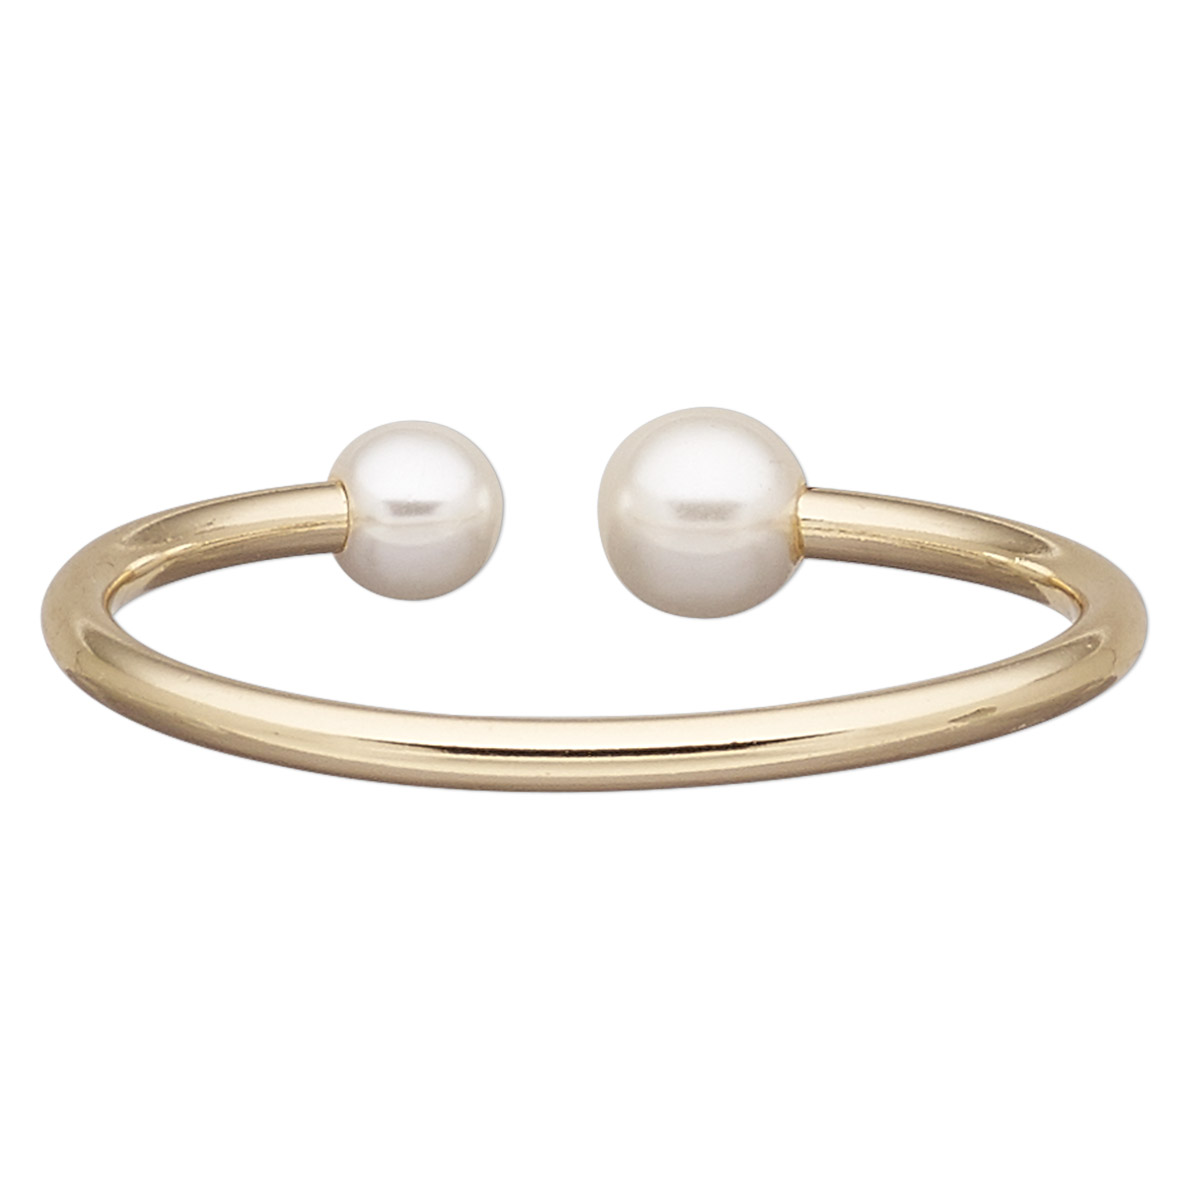 Bracelet, cuff, acrylic pearl and gold-finished brass, white, 14mm wide ...